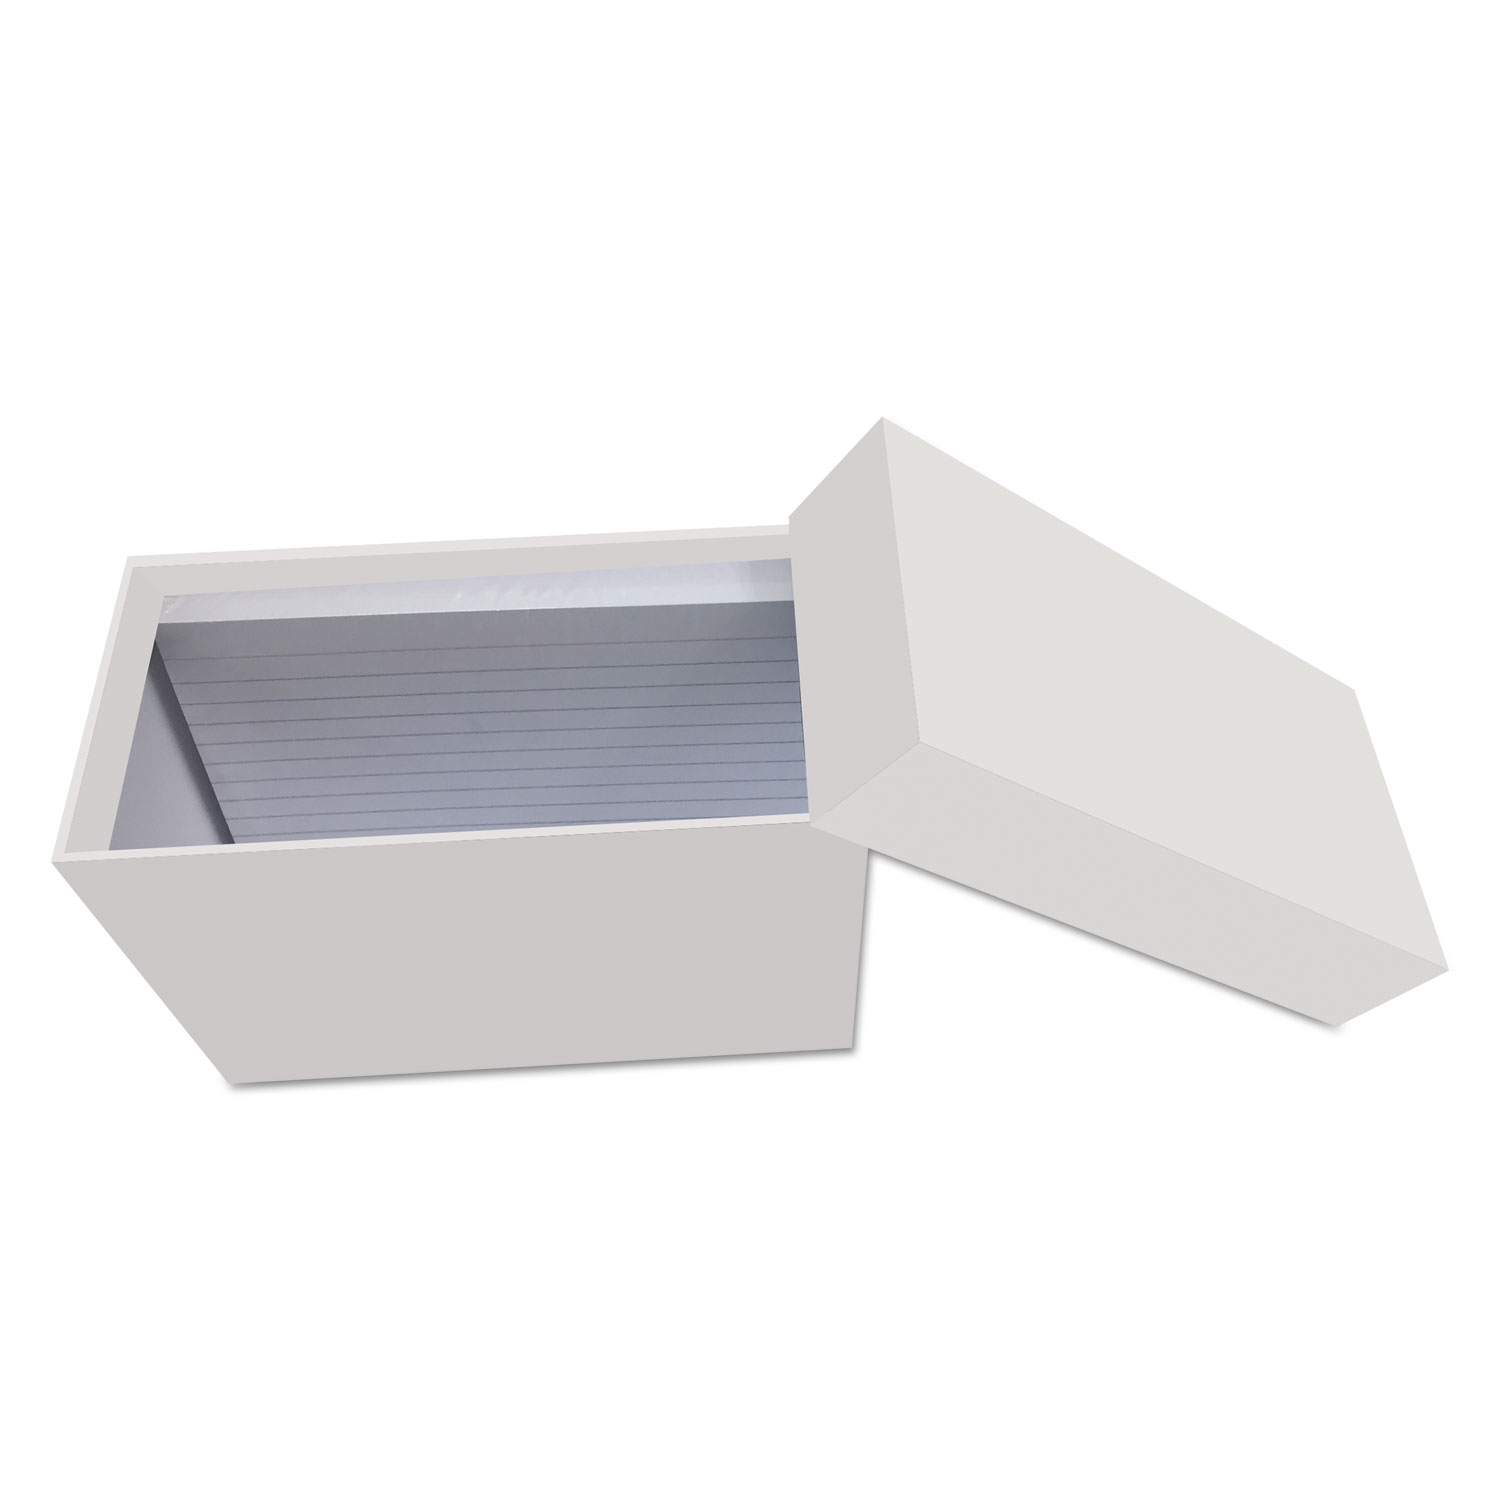 Index Card Box with 100 Ruled Index Cards, 4